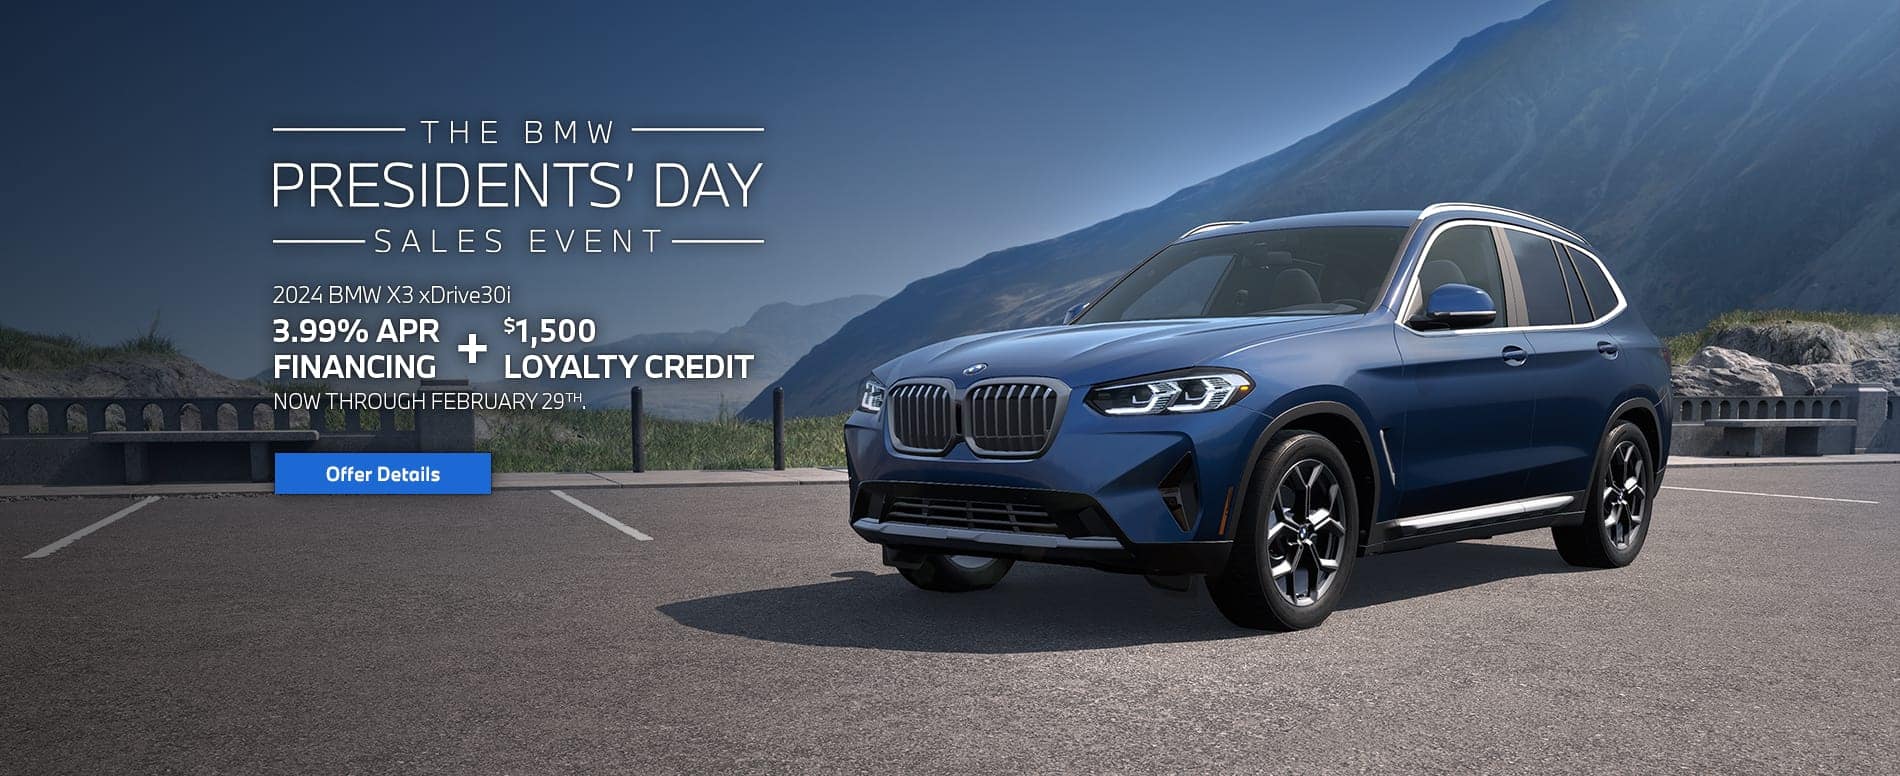 2024 BMW X3 xDrive30i Presidents’ Day APR and loyalty offer